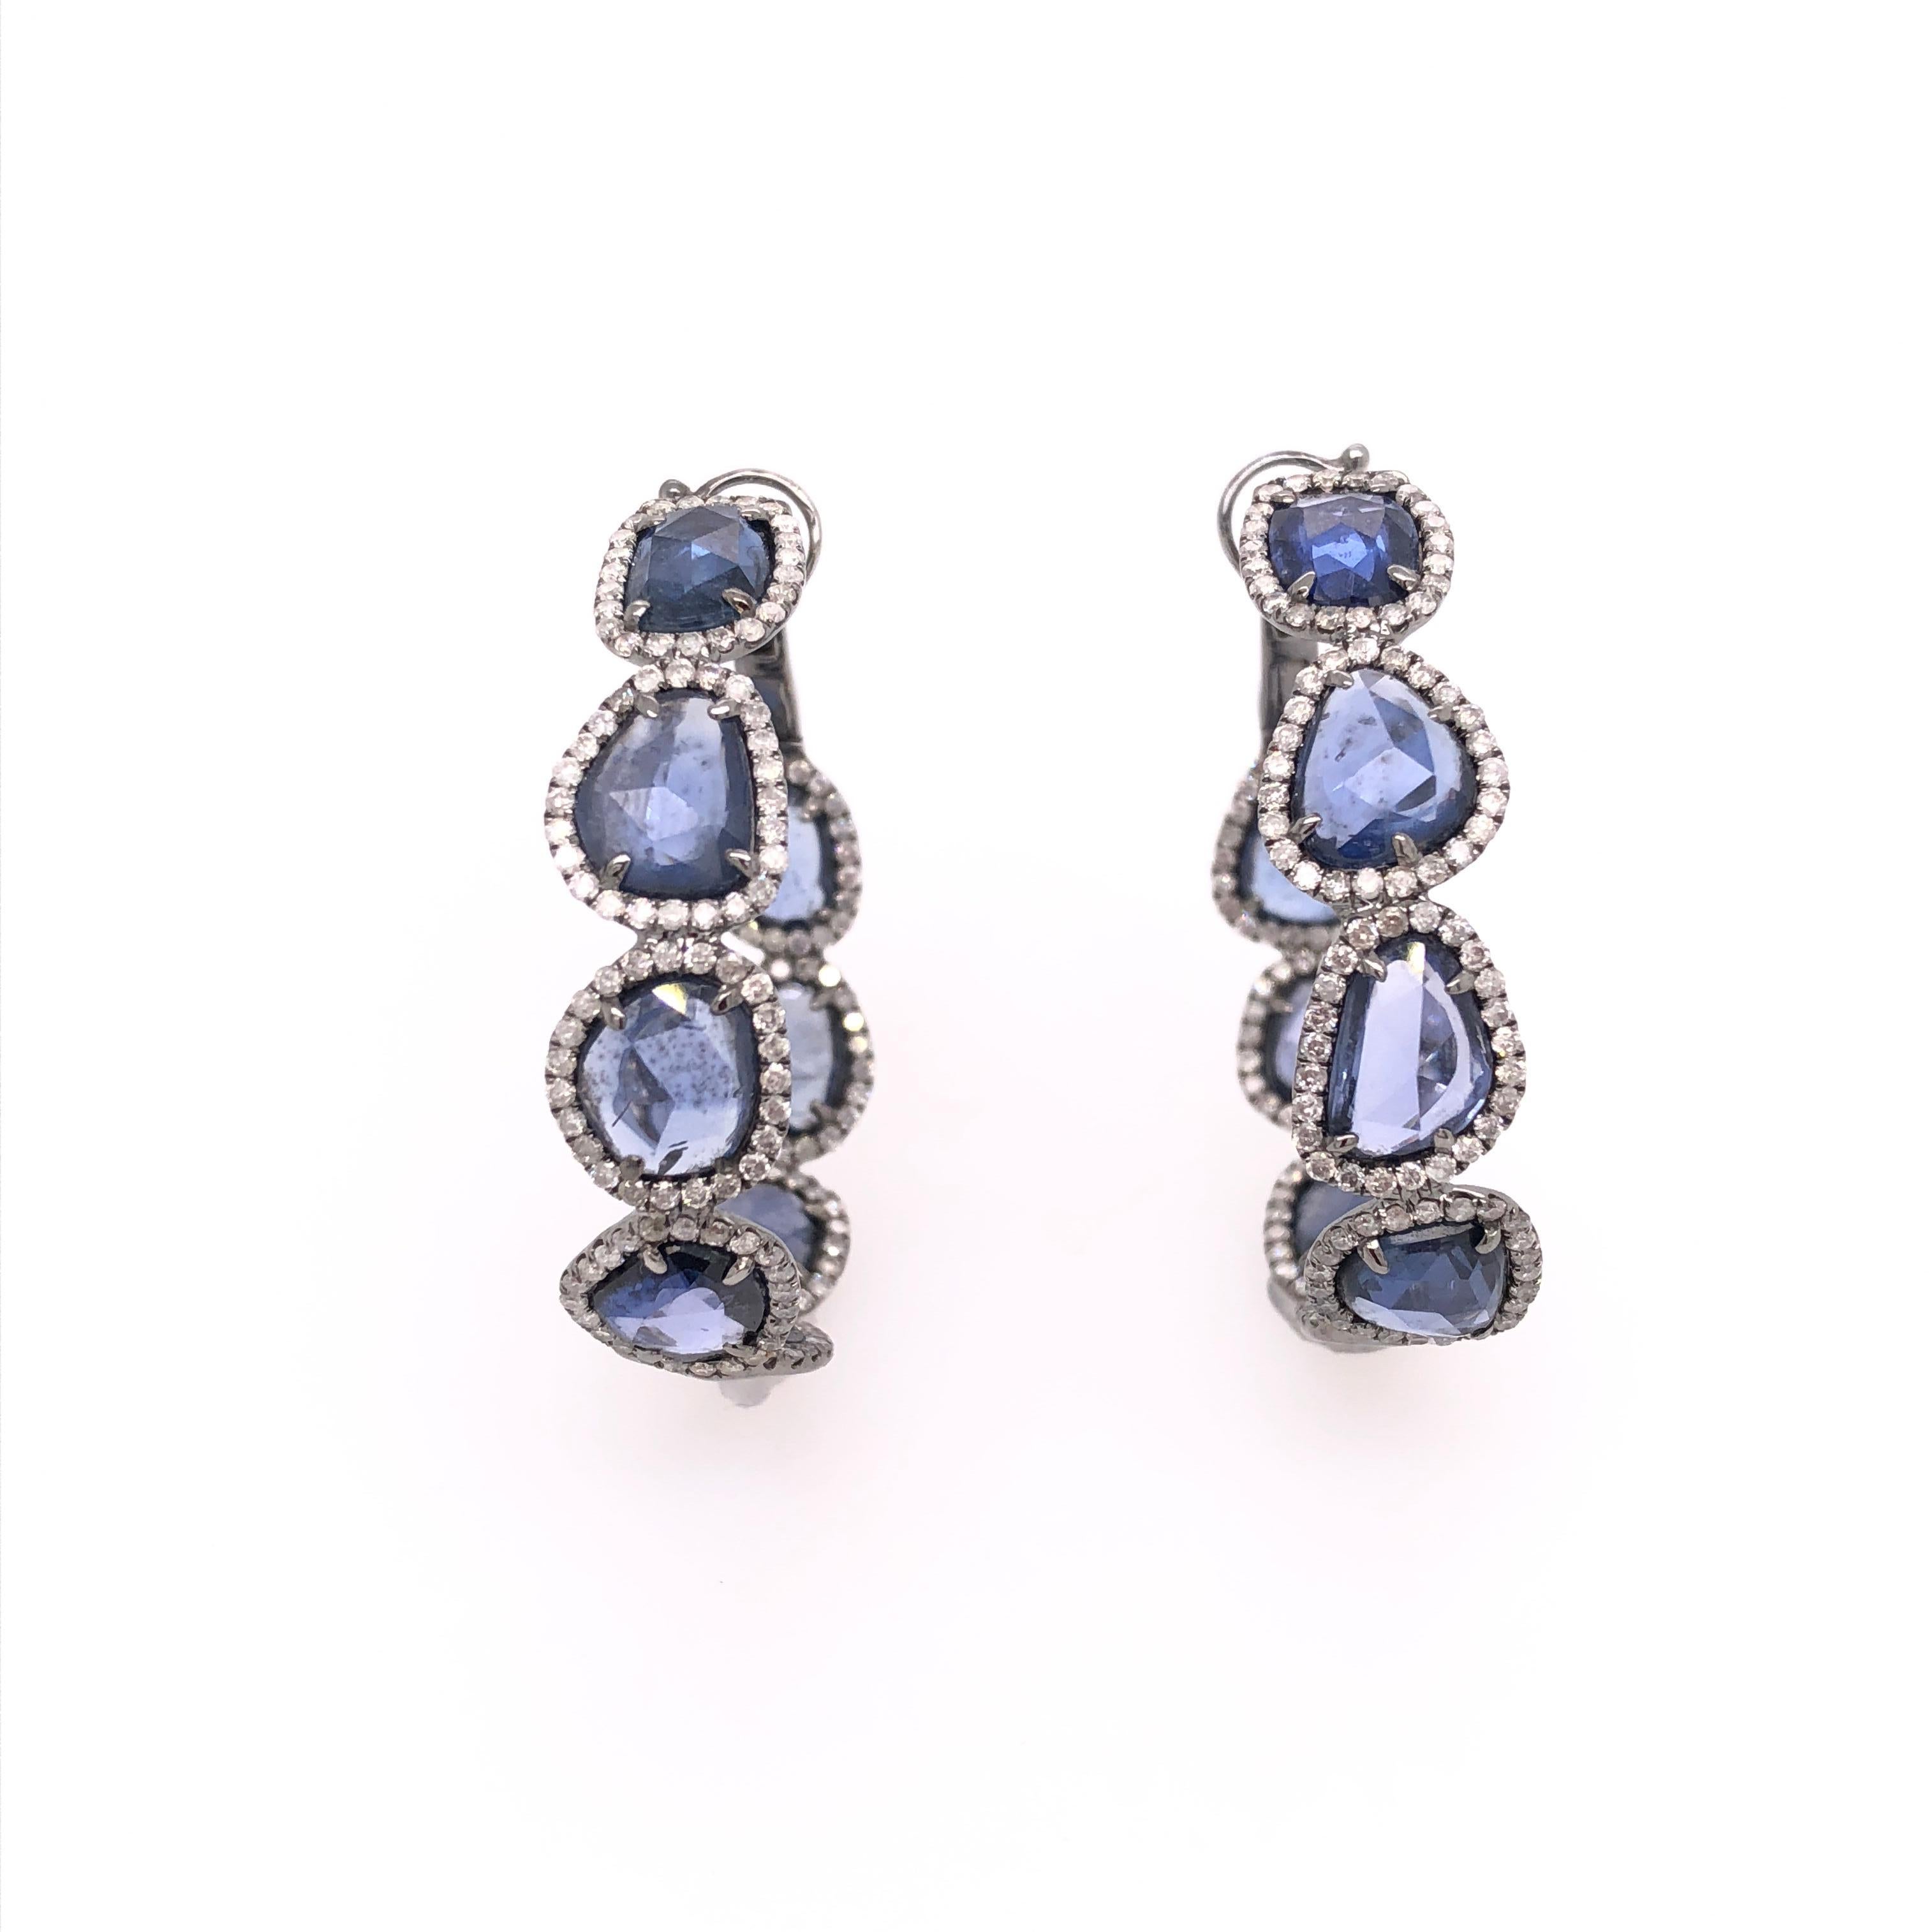 Midnight Blue Collection

Rose cut blue Sapphire hoop earrings set in 18K black rhodium gold with thin pavé diamonds around each stone. 

Blue Sapphires: 16.05ct total weight.
Diamonds: 1.78ct total weight.
All diamonds are G-H/SI stones.
Width - is